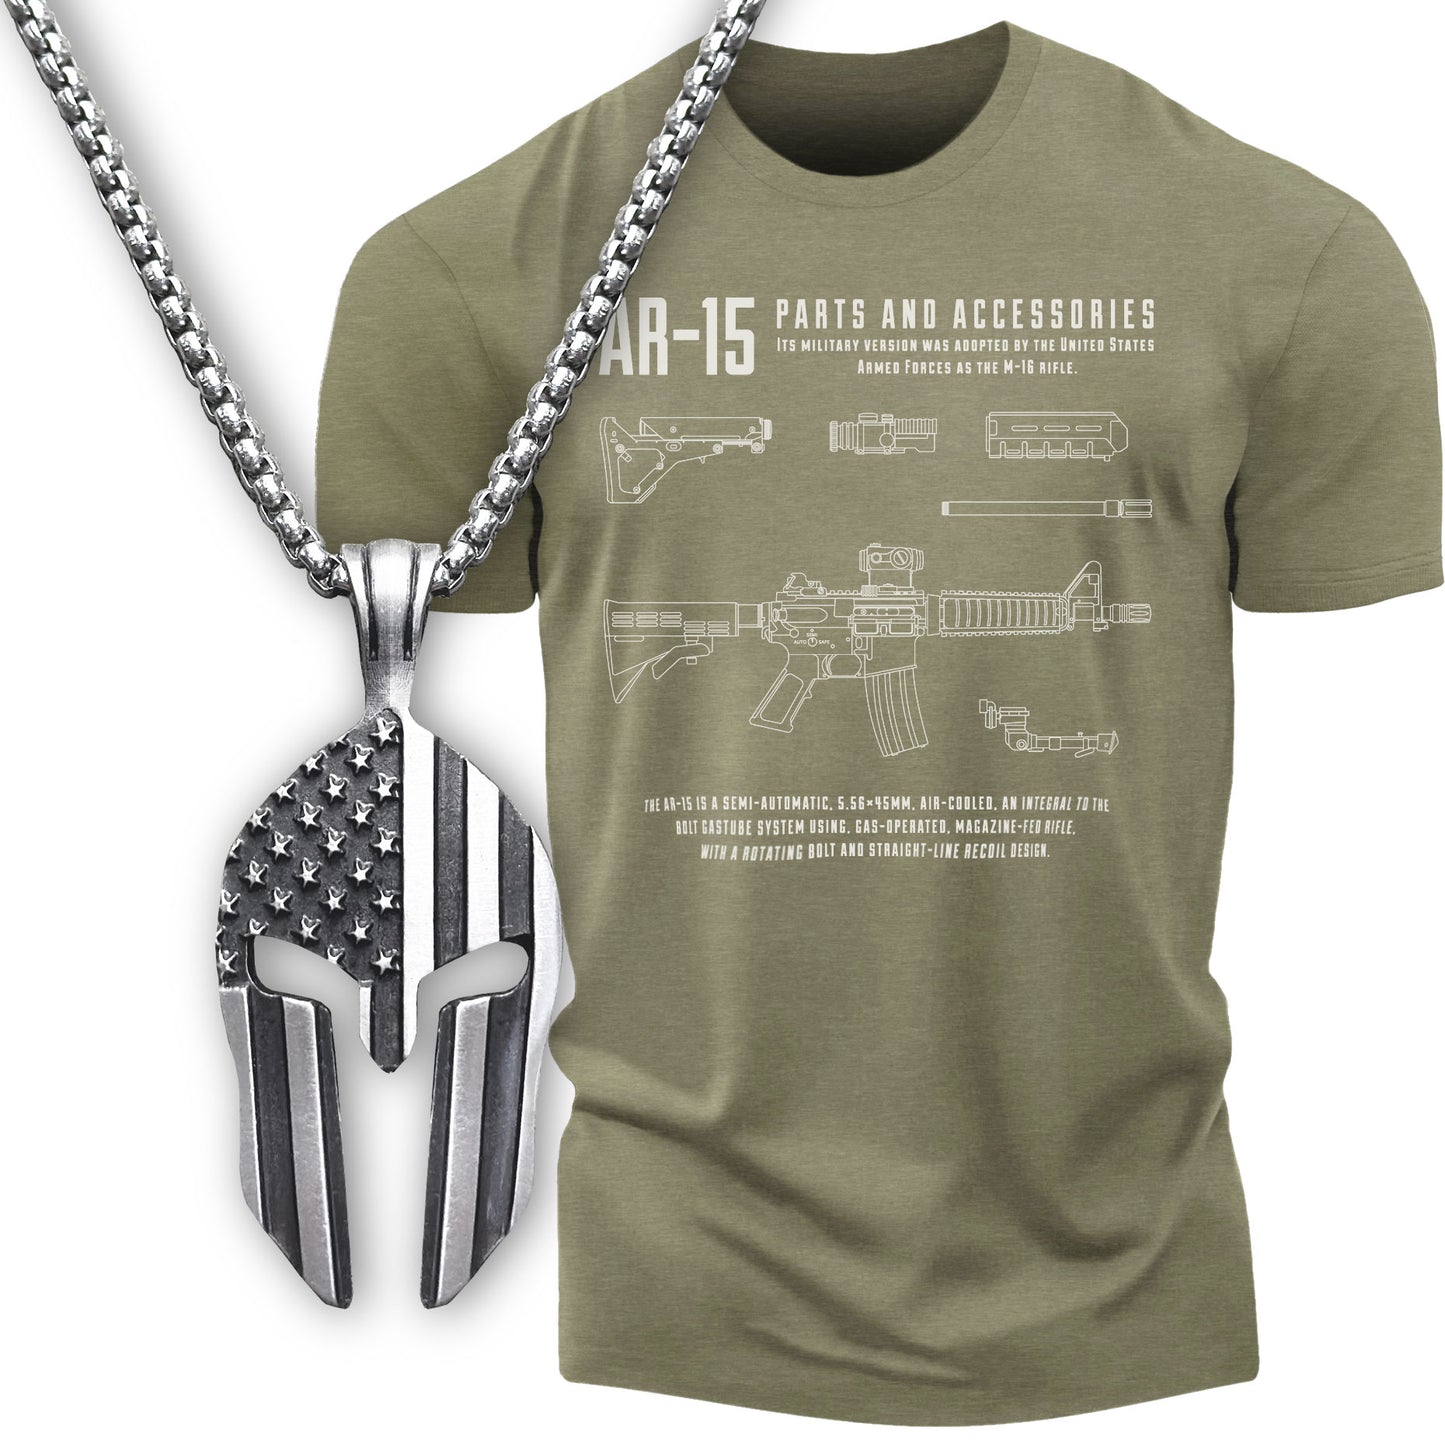 Gift Set for Men AR 15 Workout Gym Shirt with Spartan Warrior Pendant